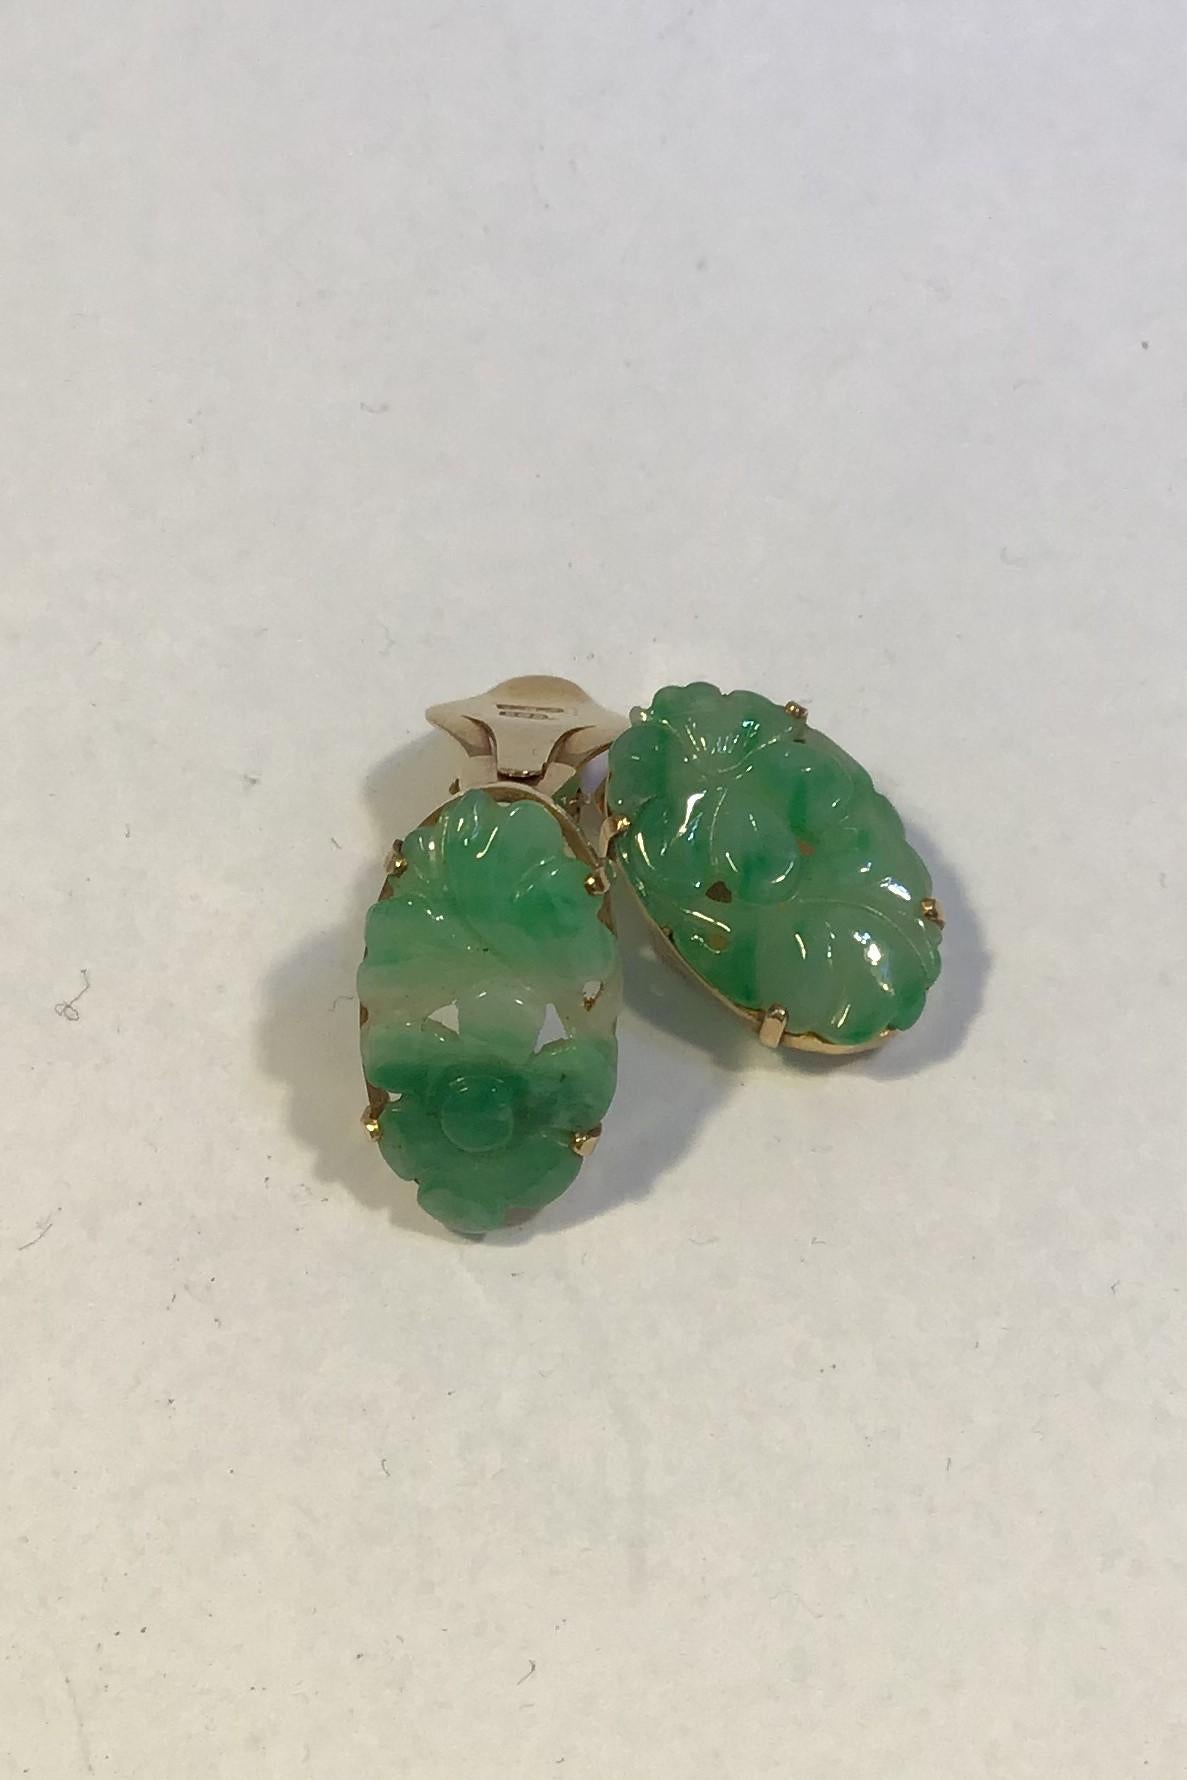 A Dragsted 14 K Guld Earrings (clips) with Jade 

Measures 2 cm x 1.2 cm(0 25/32 in x 0 15/32 in) 
Combined Weight 6.2 gr/0.22 oz